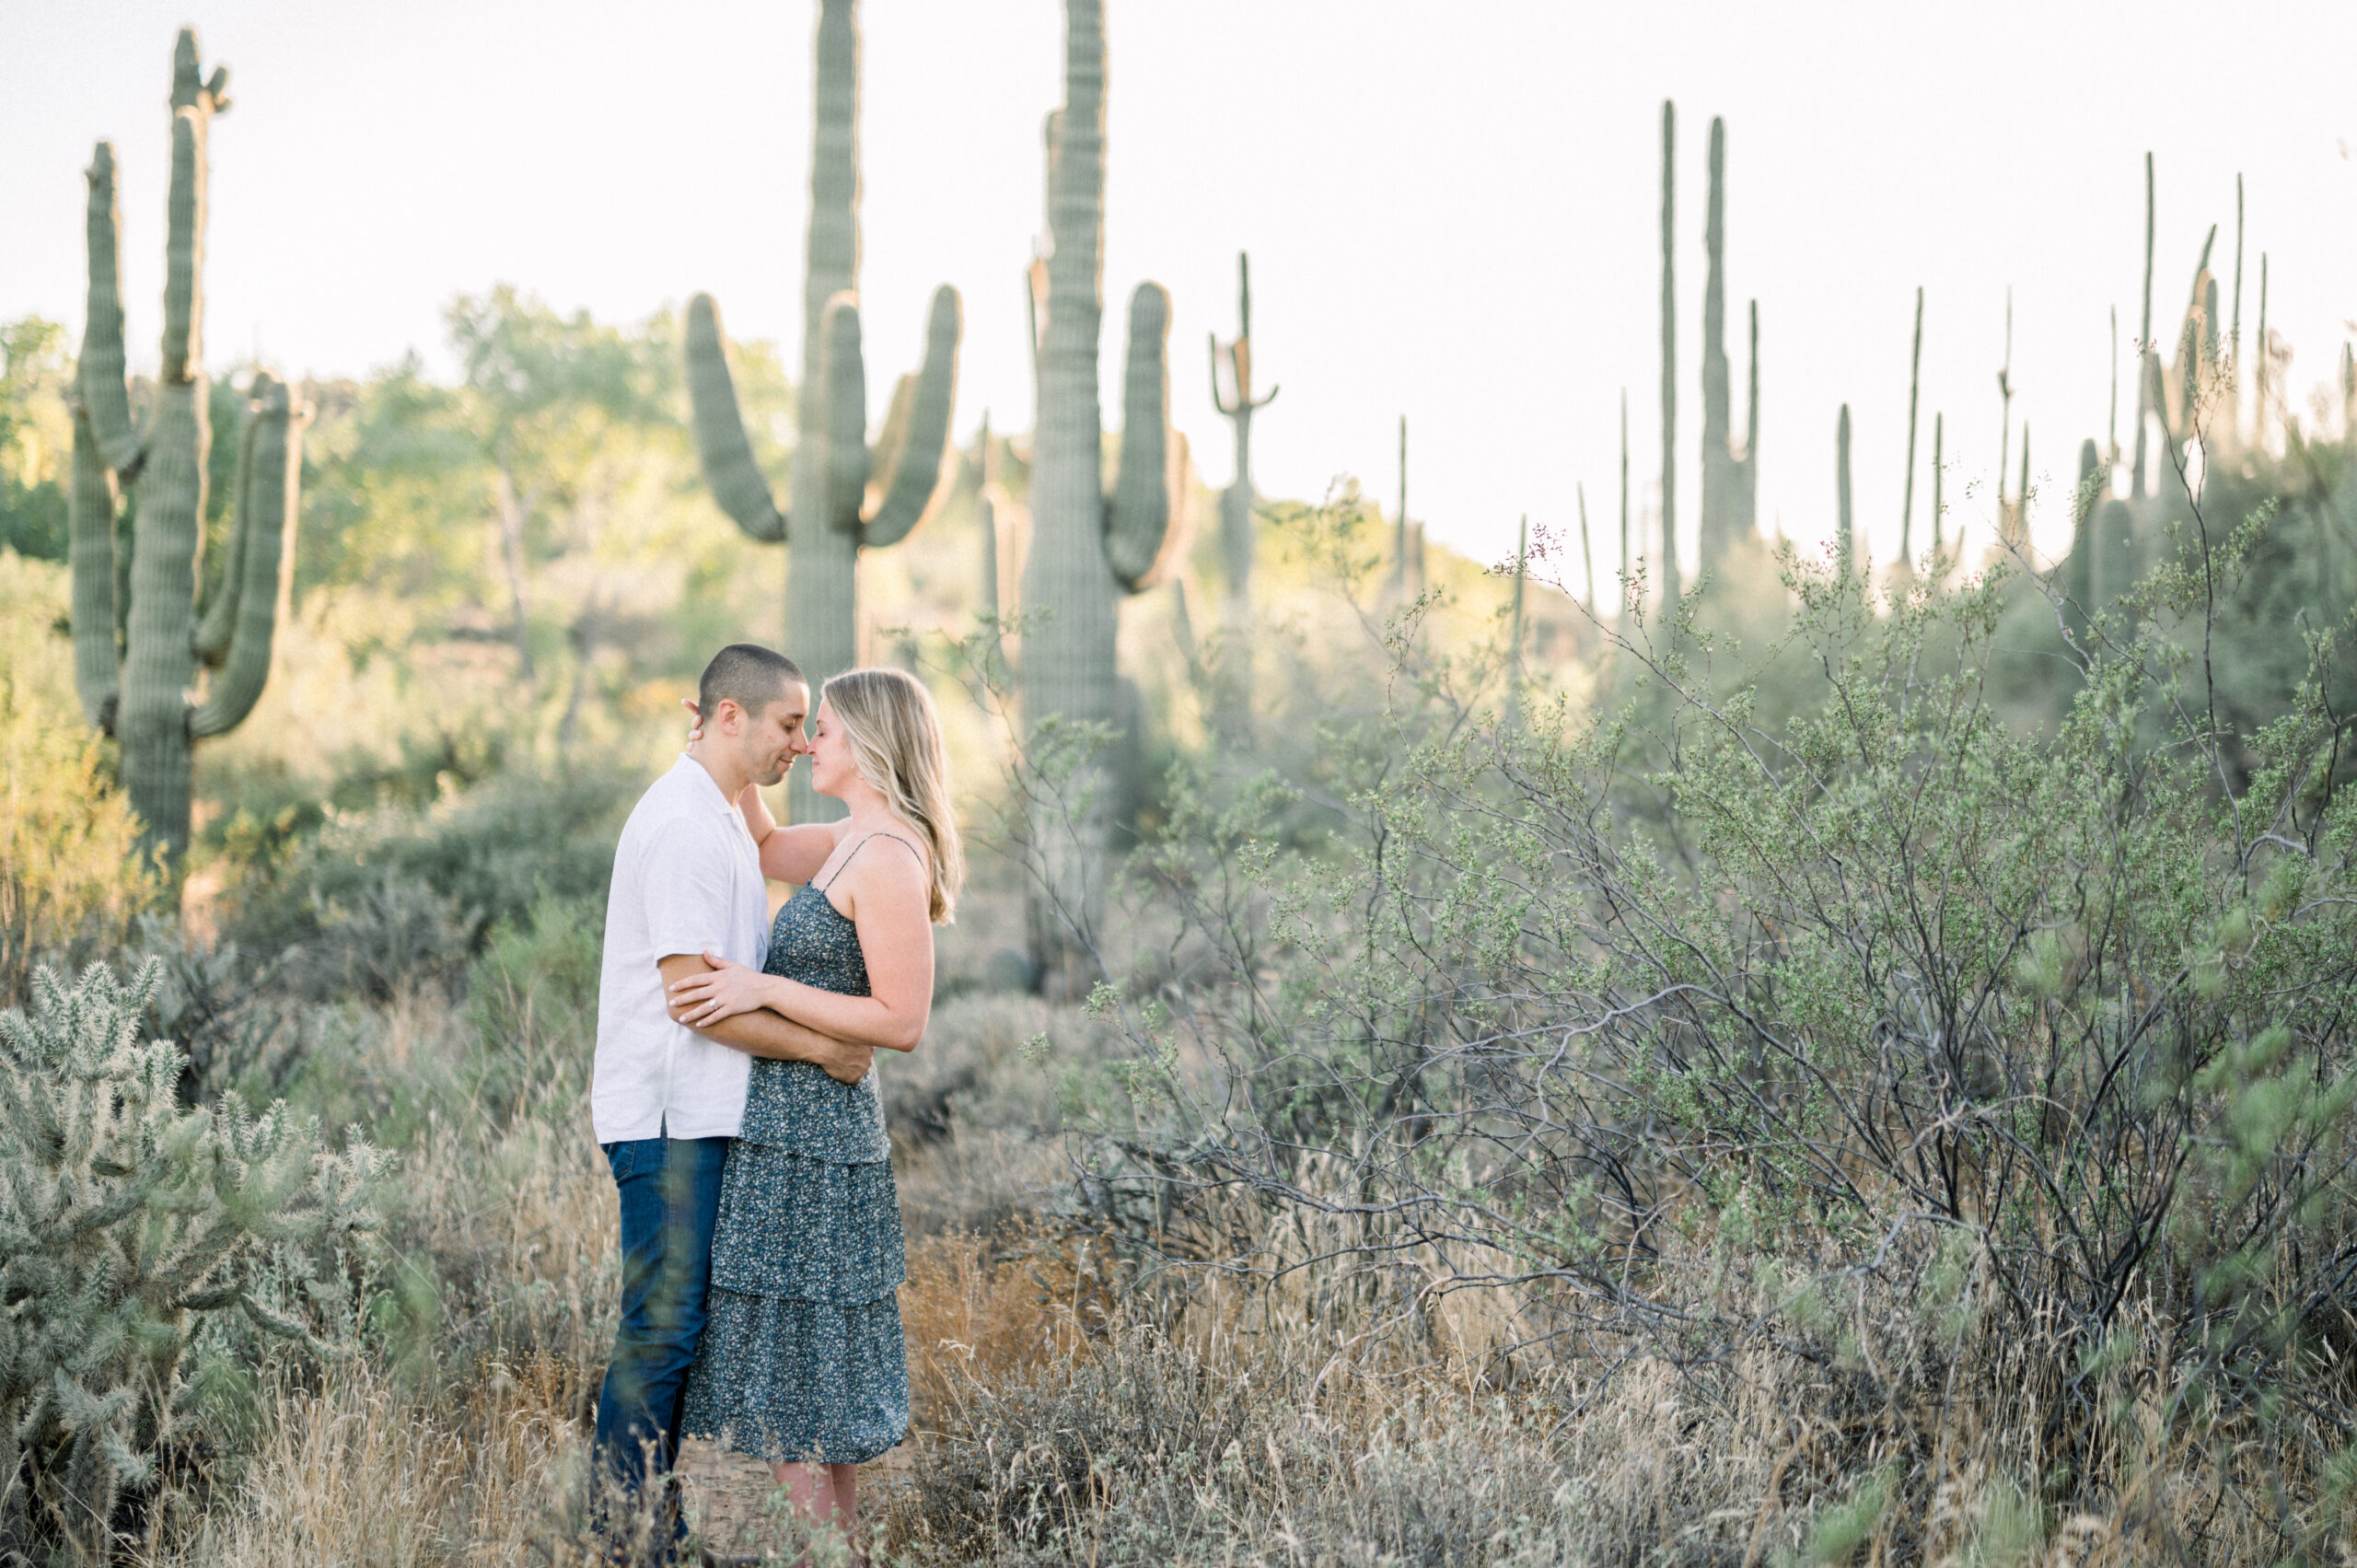 Laura and Patrick traveled all the way from Chiacgo, Illinois to have their Arizona Destination Engagement session. I can't wait for their wedding!